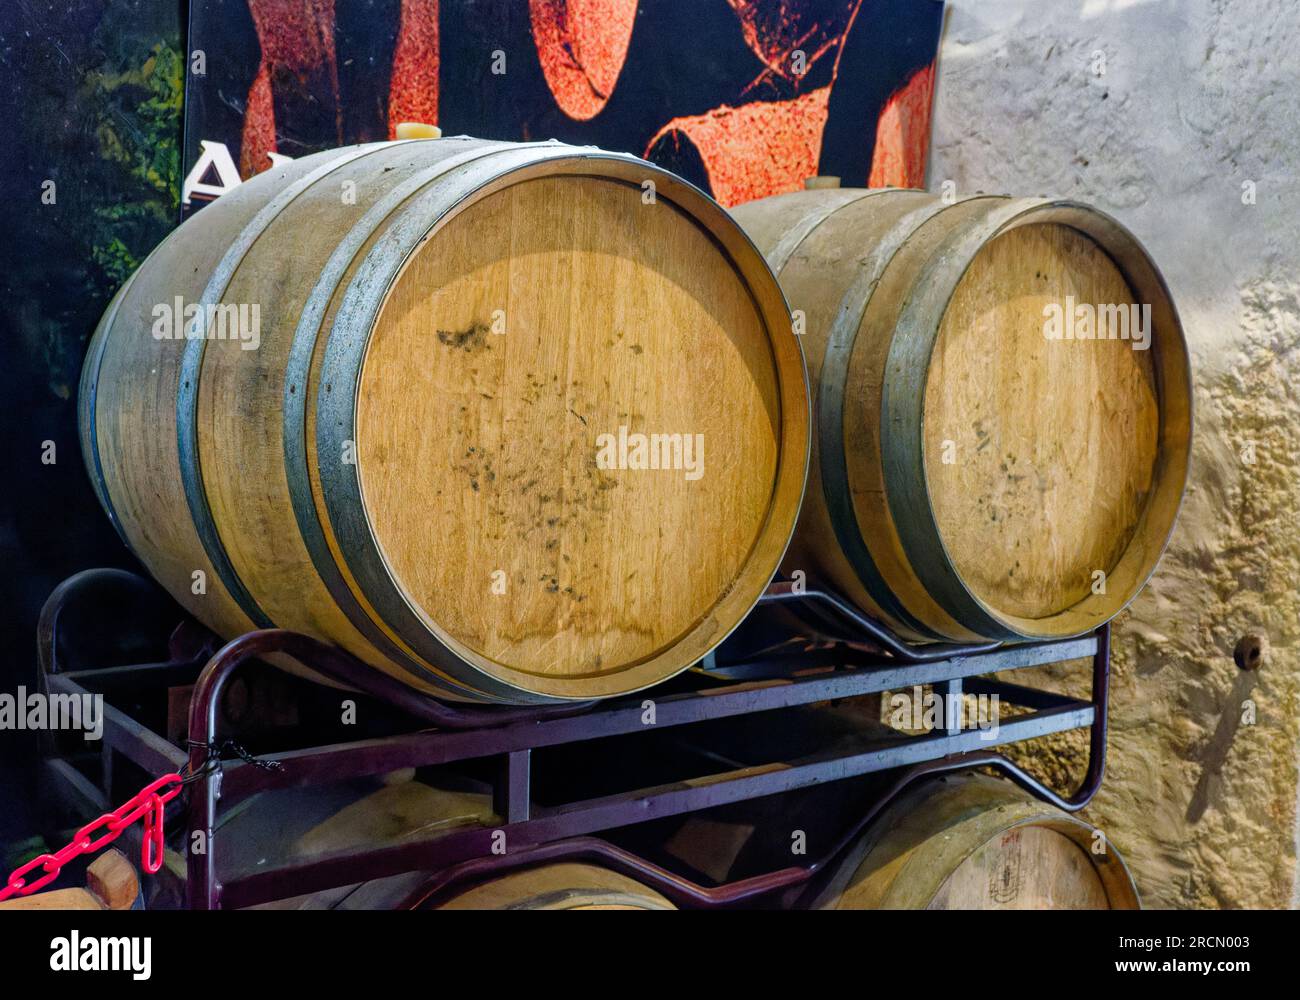 Real Companhia Velha two young barrels in their cellar, Porto, Portugal Stock Photo